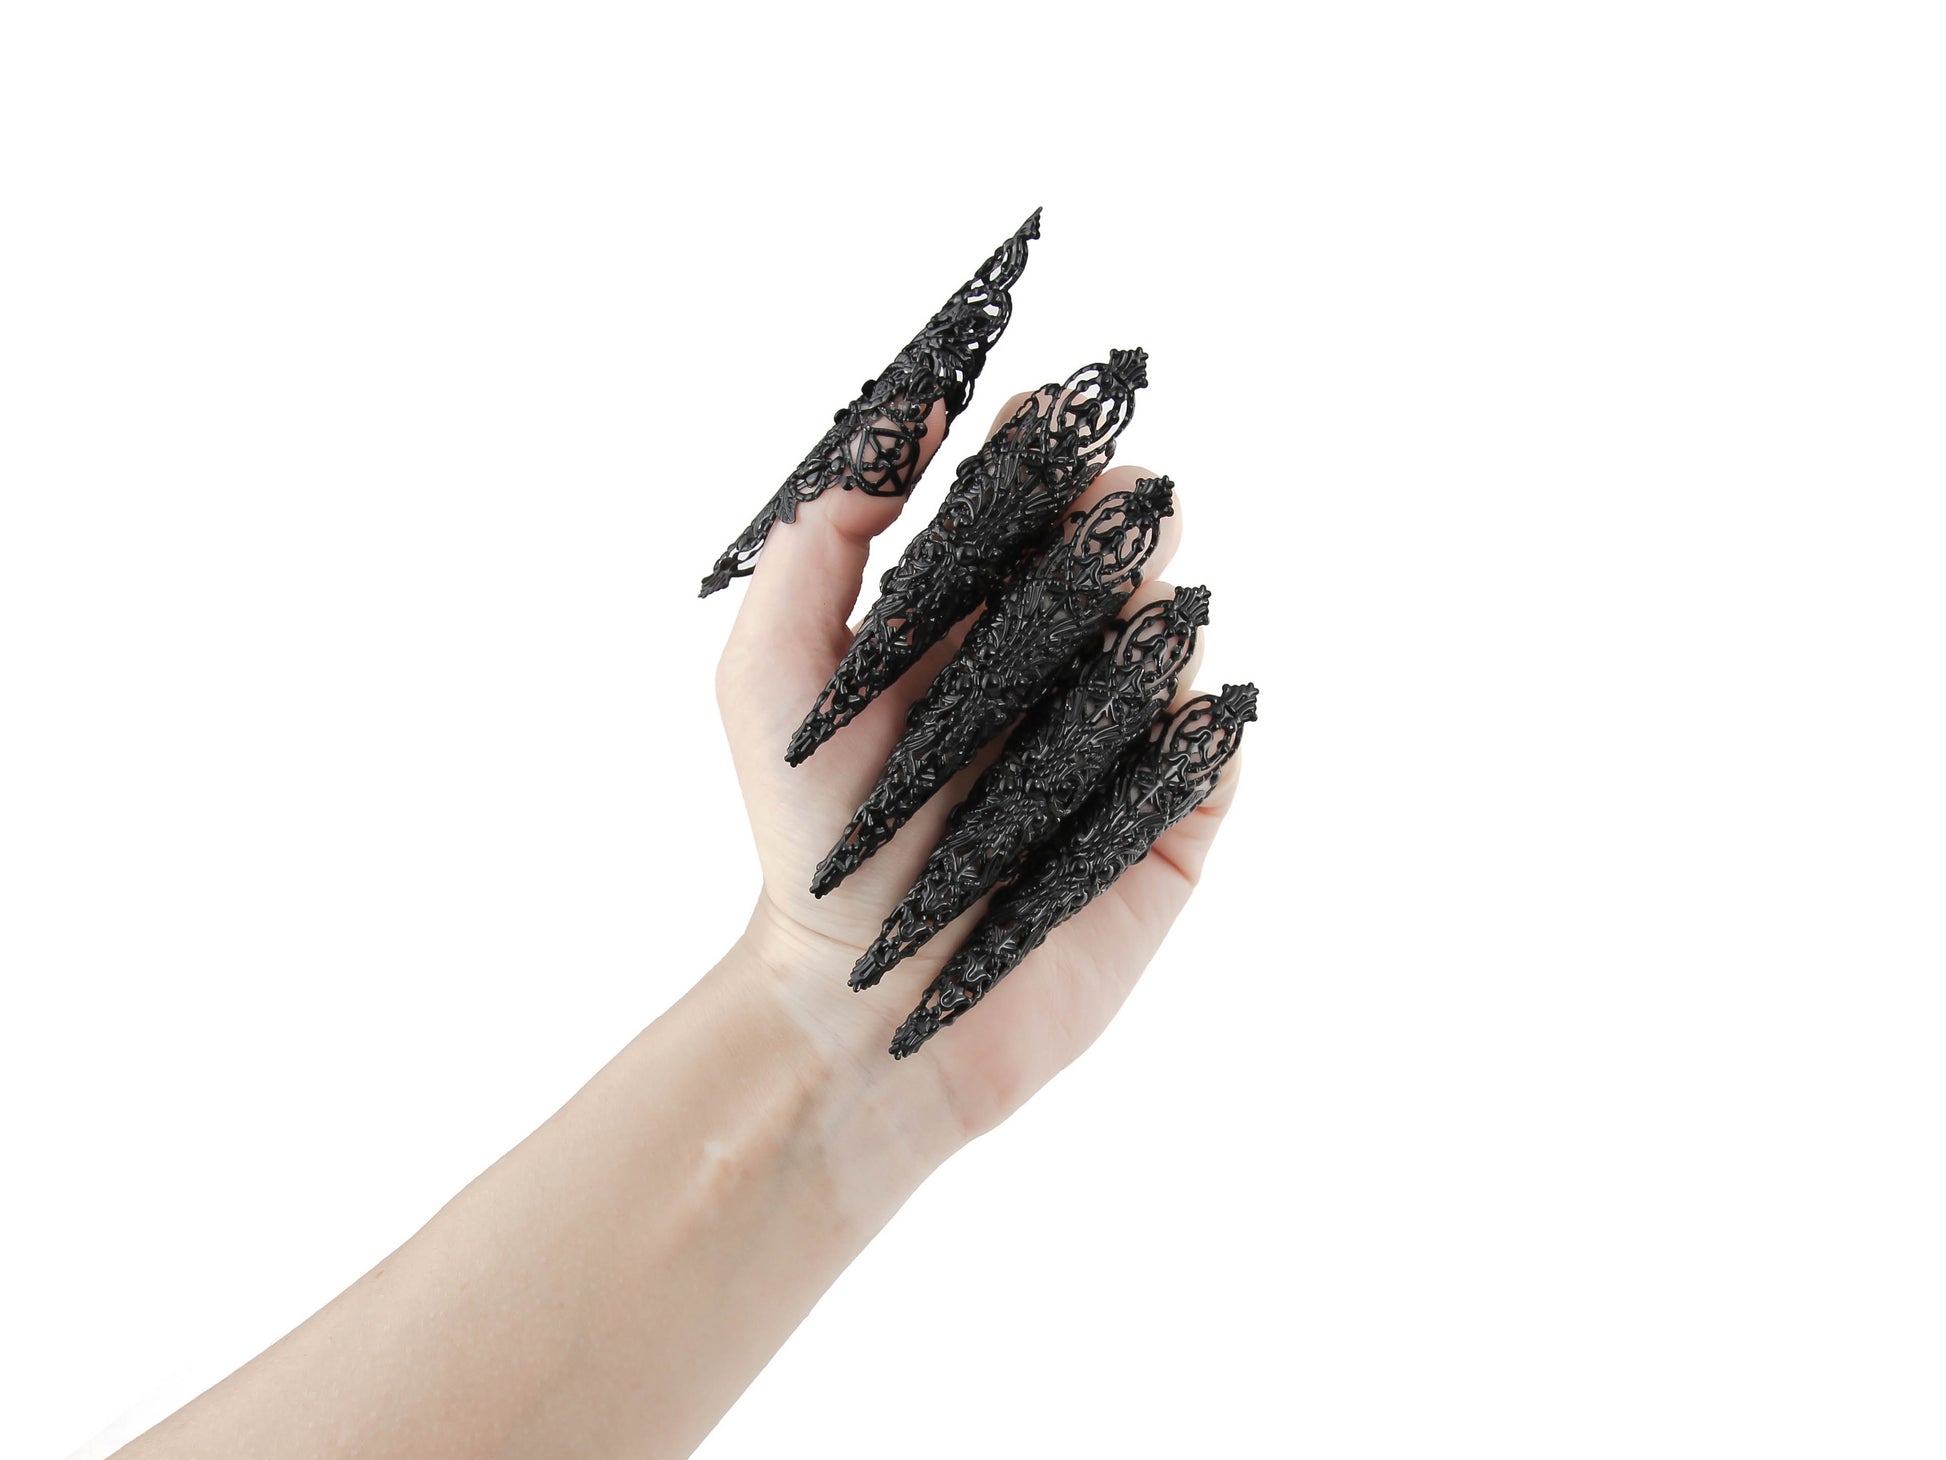 Captivating full hand set of Myril Jewels' extra long black nail claw rings showcased on a delicate hand. These neo-gothic claws are perfect for a dramatic goth-chic look, making a bold statement for Halloween, enhancing a rave party outfit, or as a memorable gift for the goth girlfriend with a love for dark avant-garde fashion.